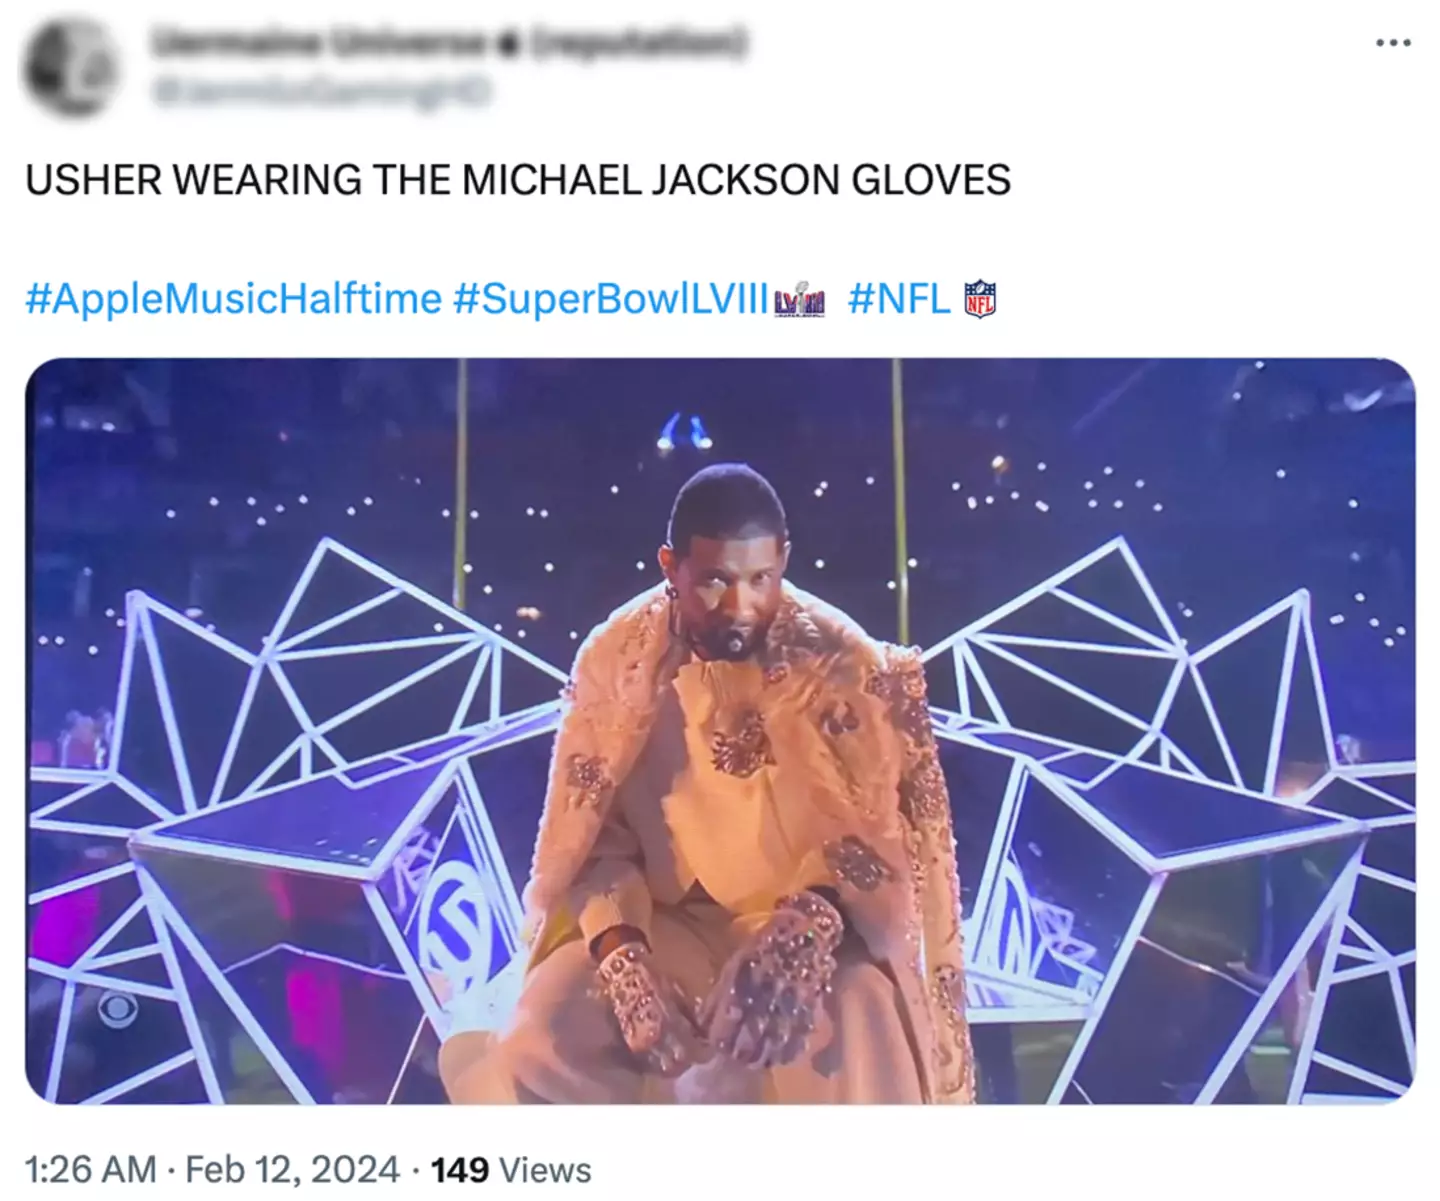 Many fans think Usher was paying tribute to Michael Jackson.